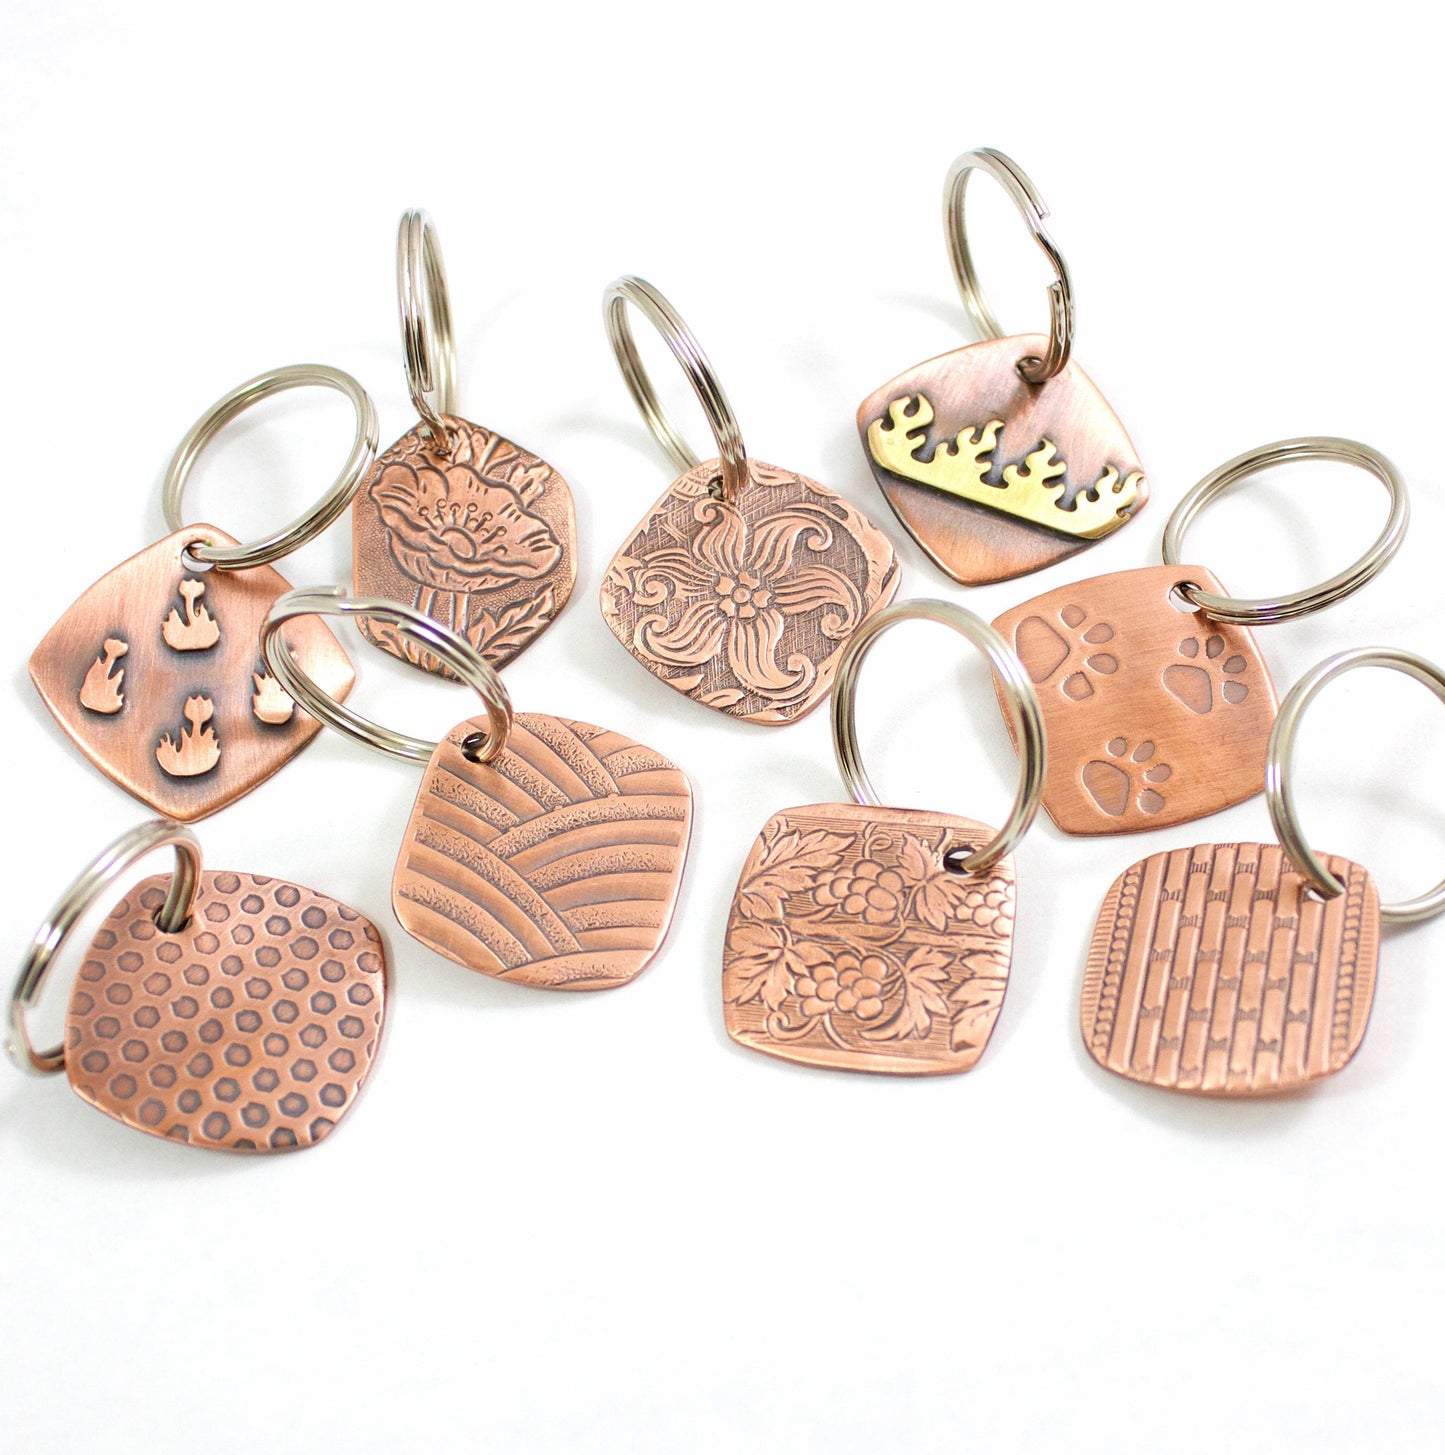 Collection of copper keychains, all square with softly rounded corners. Desgins include flowers, flames, pawprints, bricks, grapes, and arches